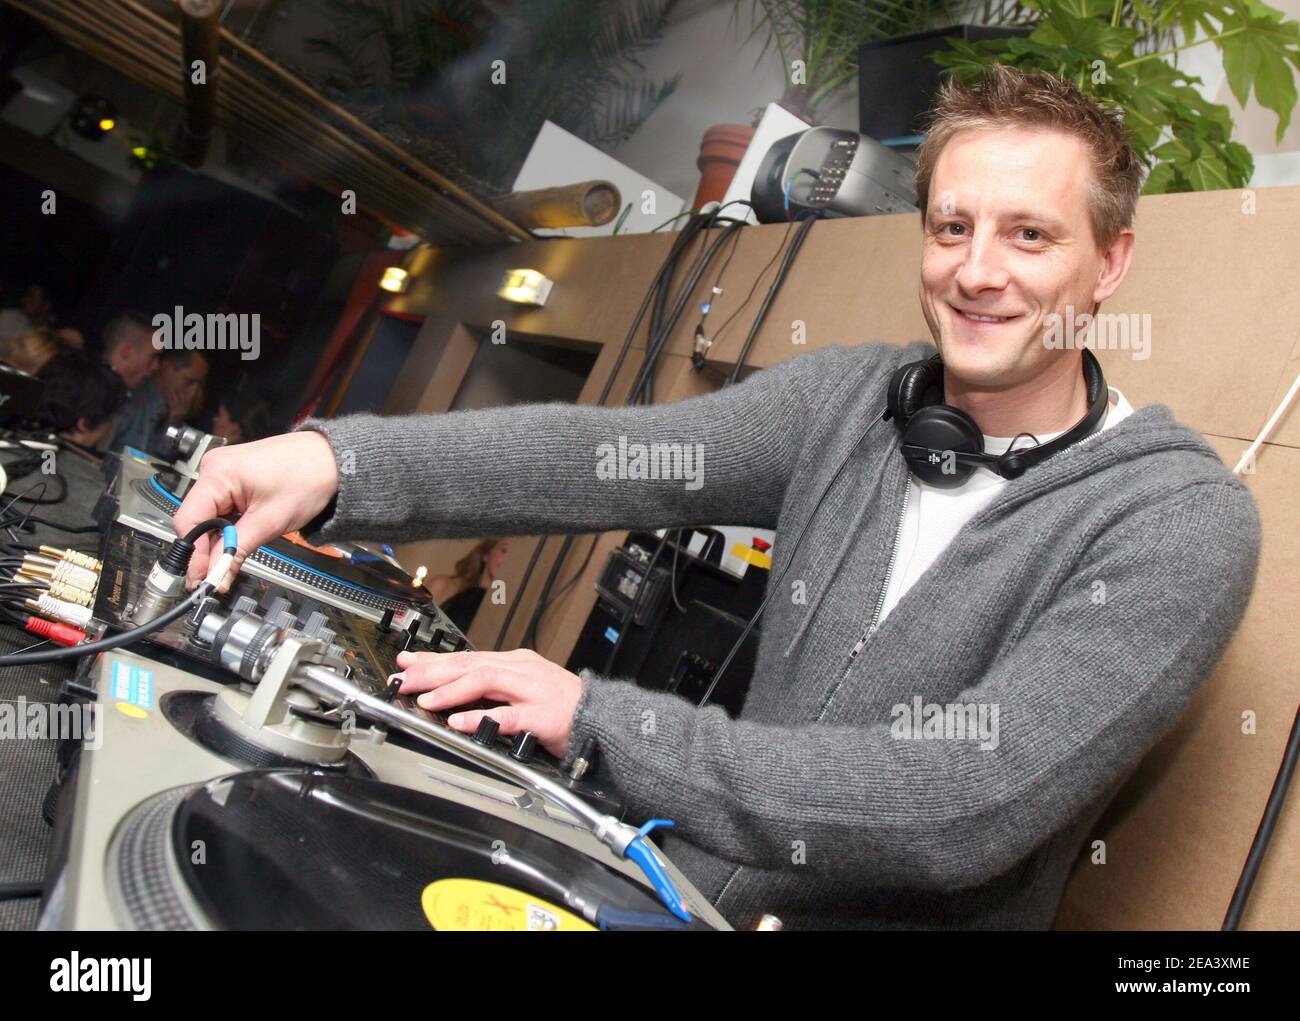 French radioman Max, Fun radio mixes music during the opening party of  Dinard Festival, for young fashion designers. Photo by Edouard Stock Photo  - Alamy